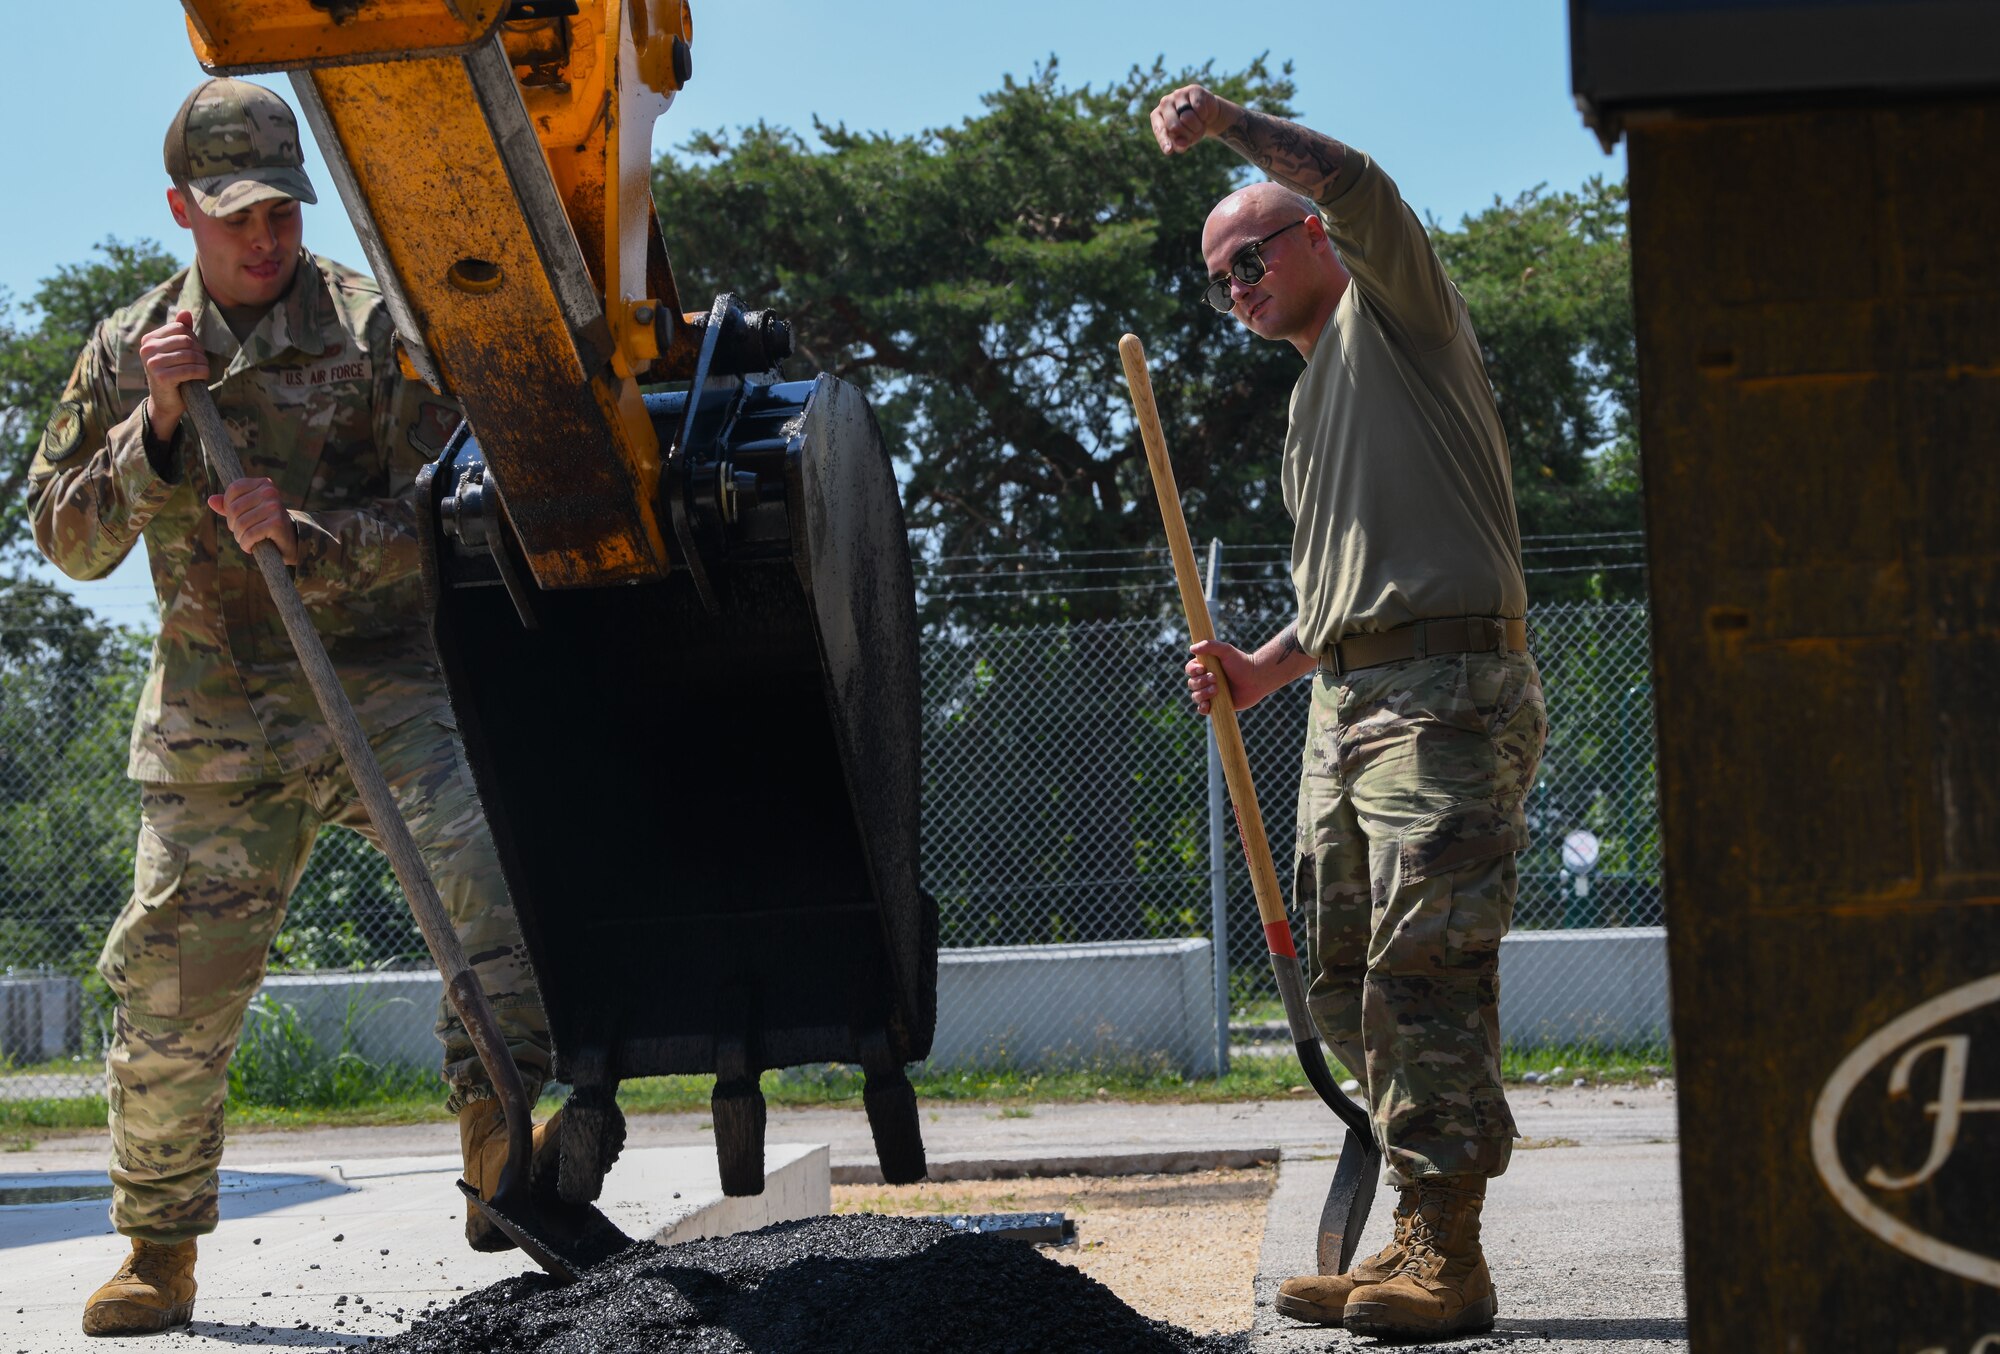 Senior Airman Parker Roberts, 31st Civil Engineer Squadron pavements and heavy equipment journeyman, right, and Senior Airman Jacob Bates, 31st CES pavements and heavy equipment journeyman, prepares asphalt for paving at Aviano Air Base, Italy, June 30, 2022. As members of the 31st CES’s “Dirt Boyz” section, Roberts and Parker are responsible for any CE project that involves construction and repair on runways, roads, sidewalks and more. (U.S. Air Force photo by Airman 1st Class Thomas Calopedis)